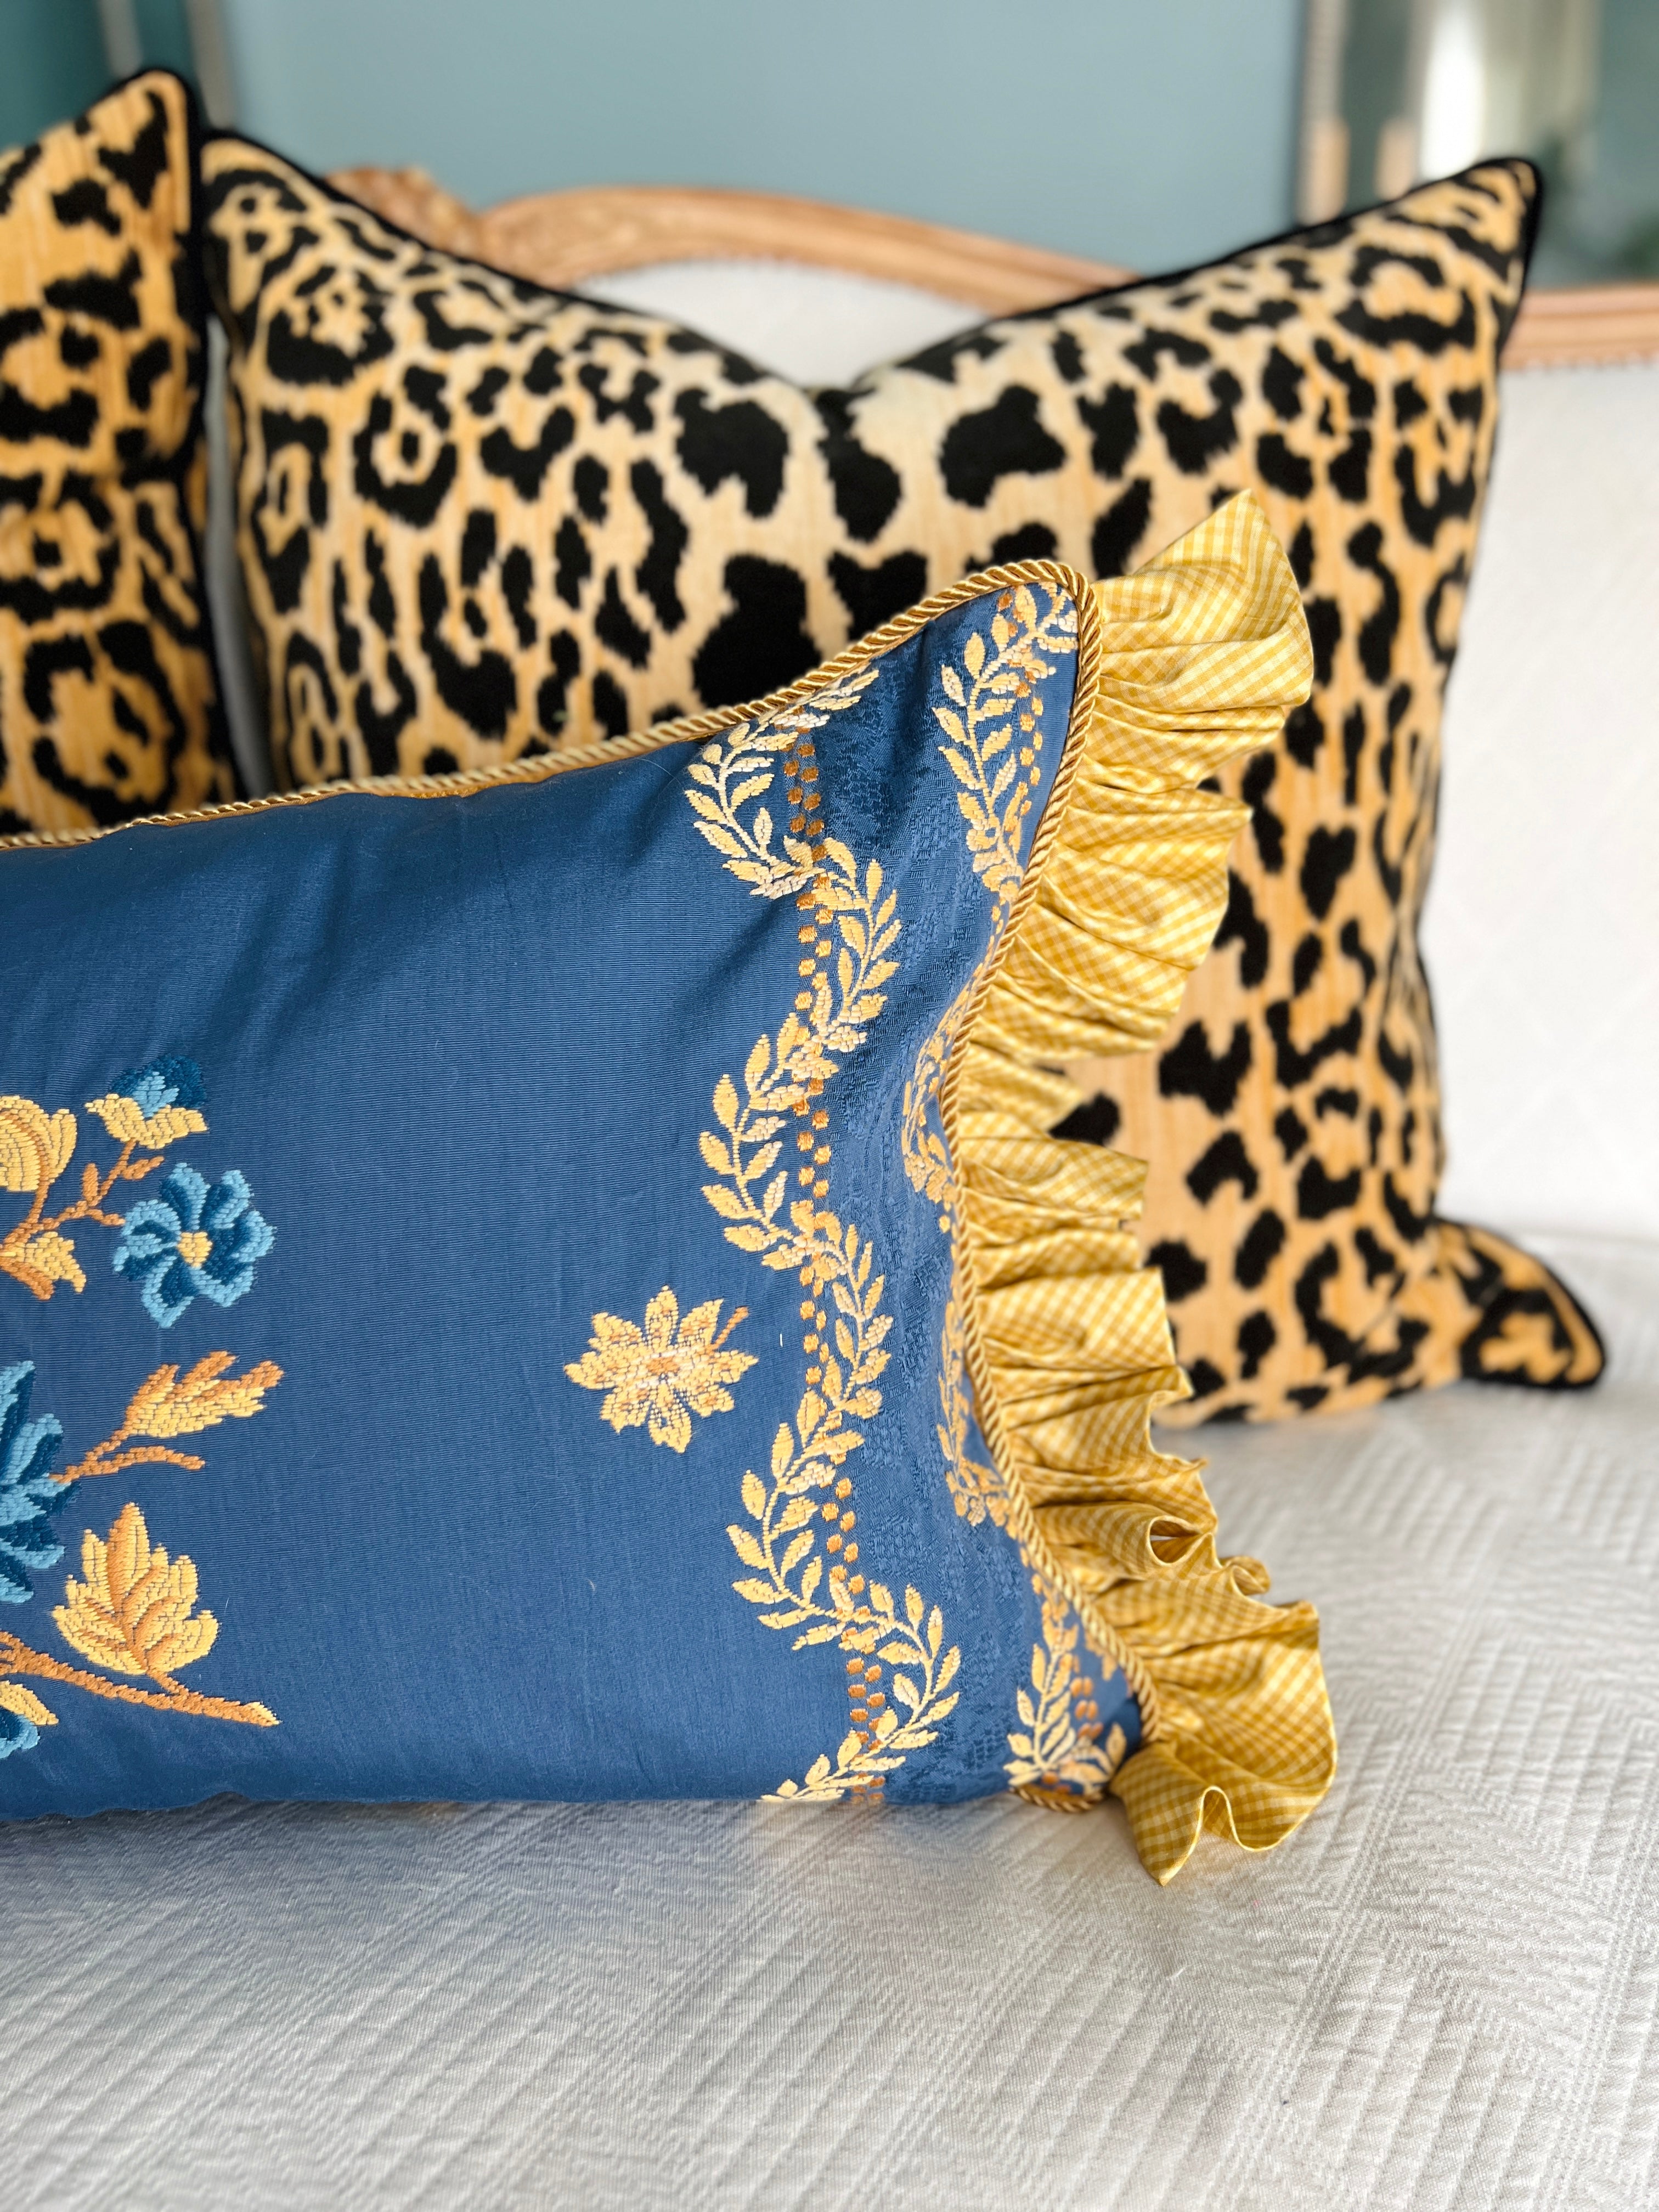 Blue and yellow embroidered pillow cover with silk ruffle trim